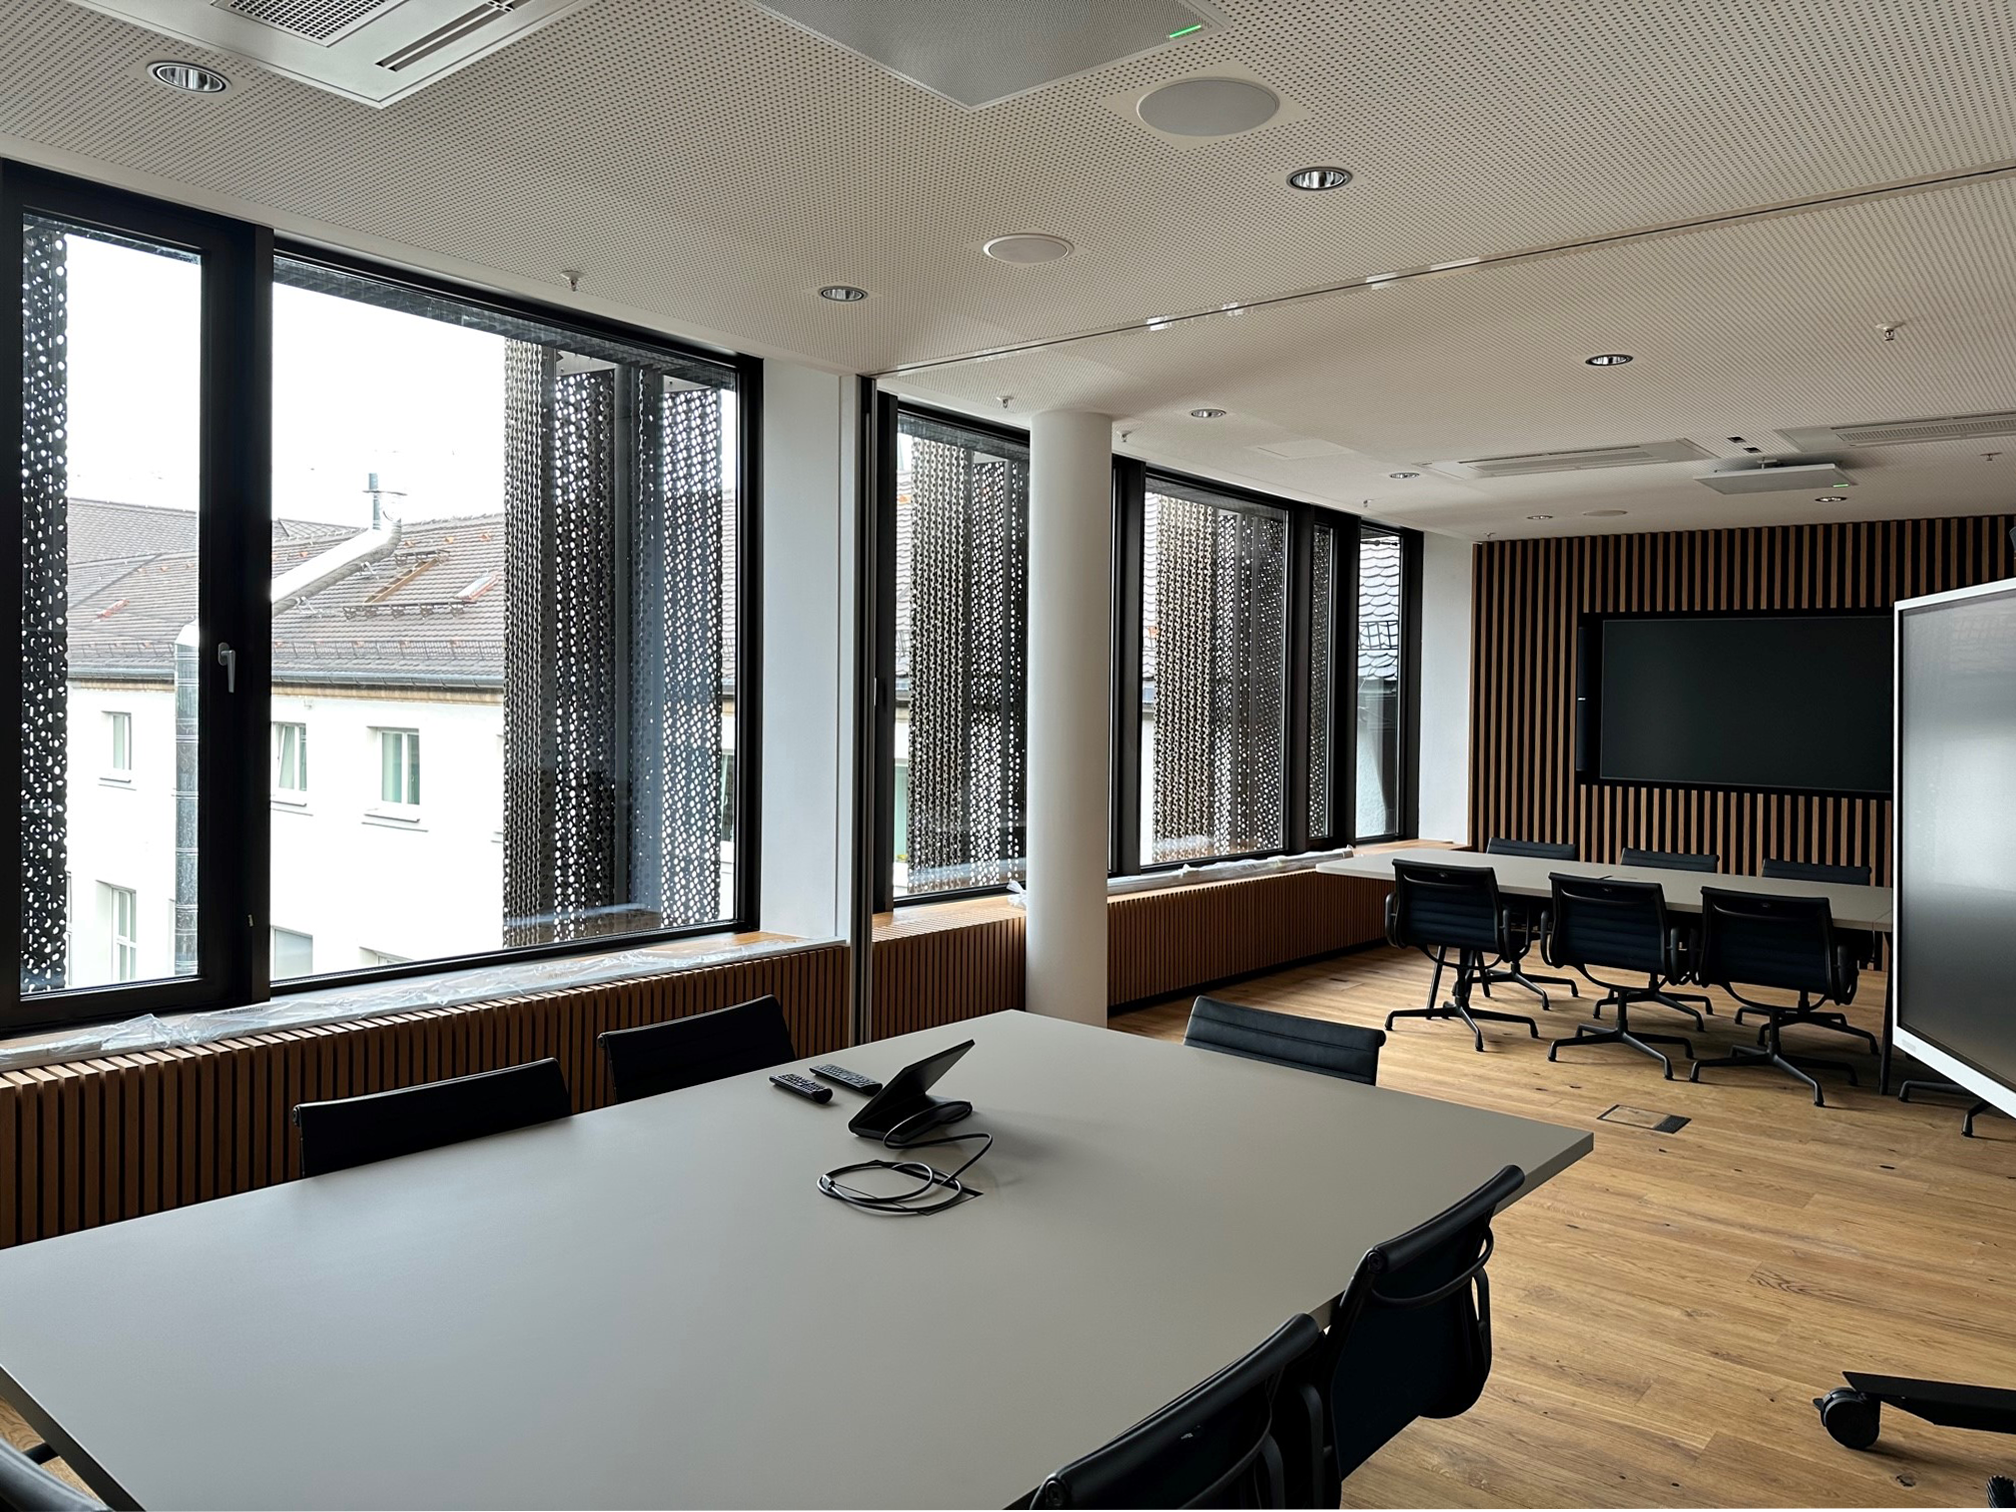 arqis, perforated shutters, window, meeting, meeting table